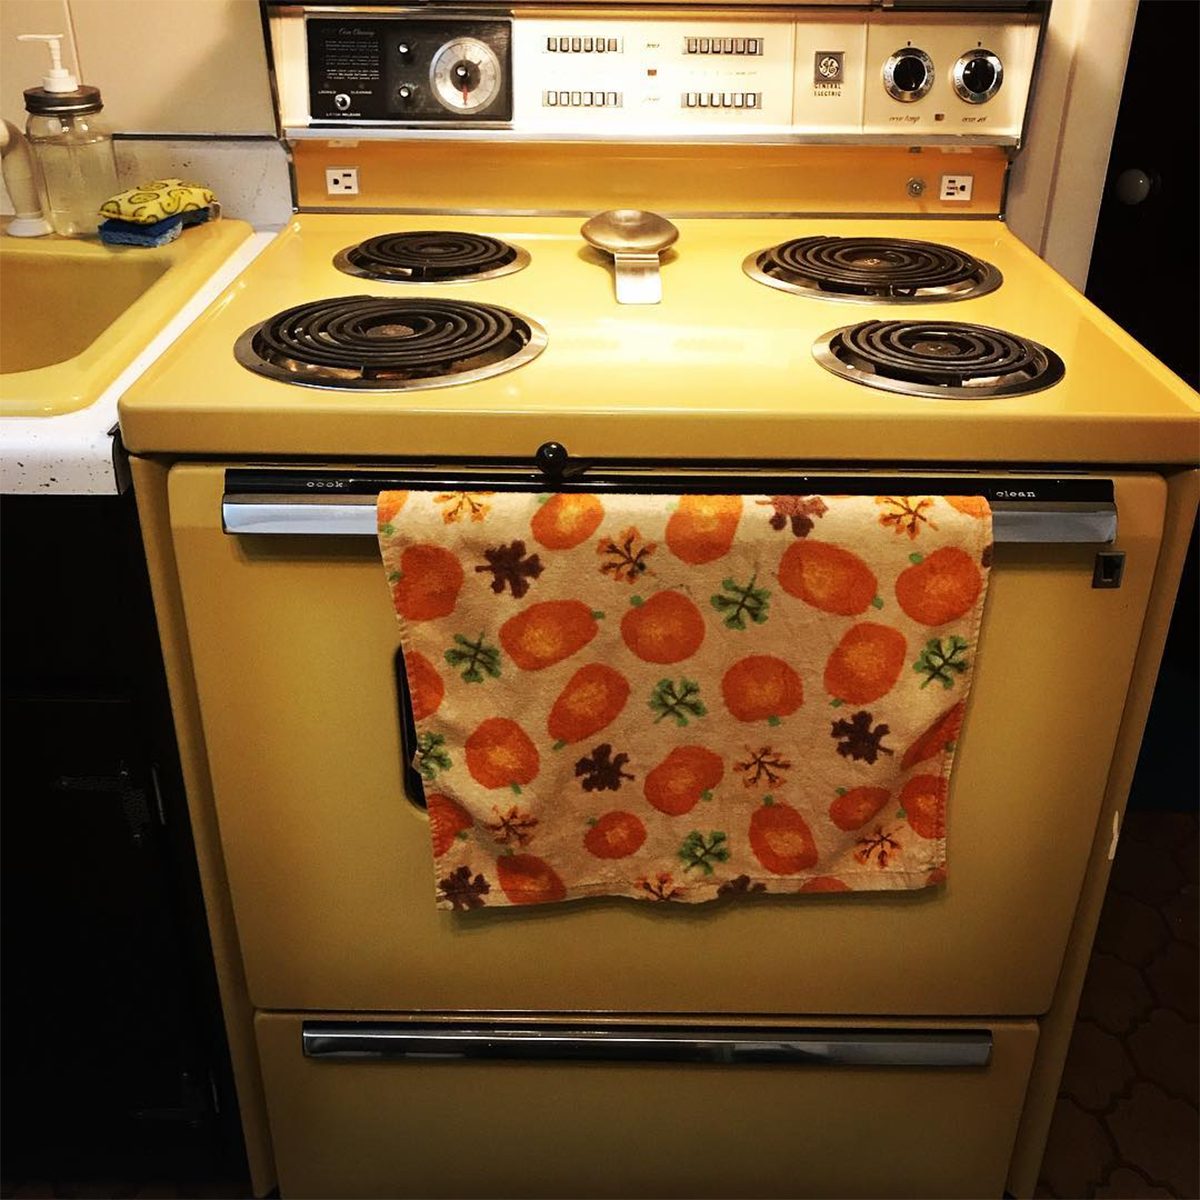 VintageAppliance YellowStove ?fit=700,700